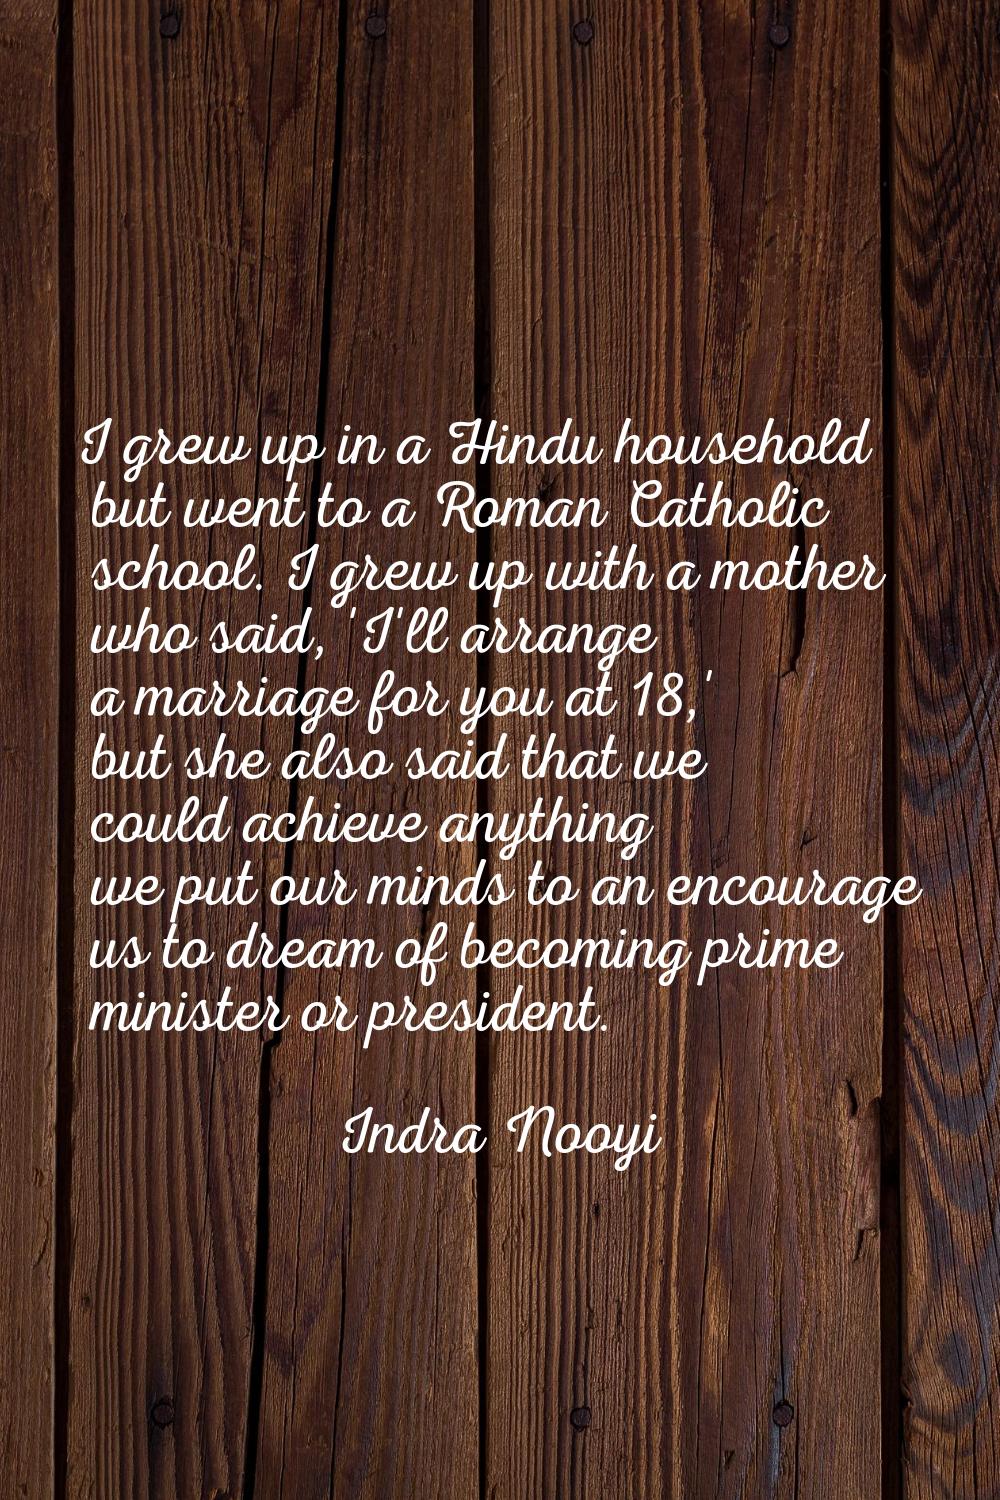 I grew up in a Hindu household but went to a Roman Catholic school. I grew up with a mother who sai